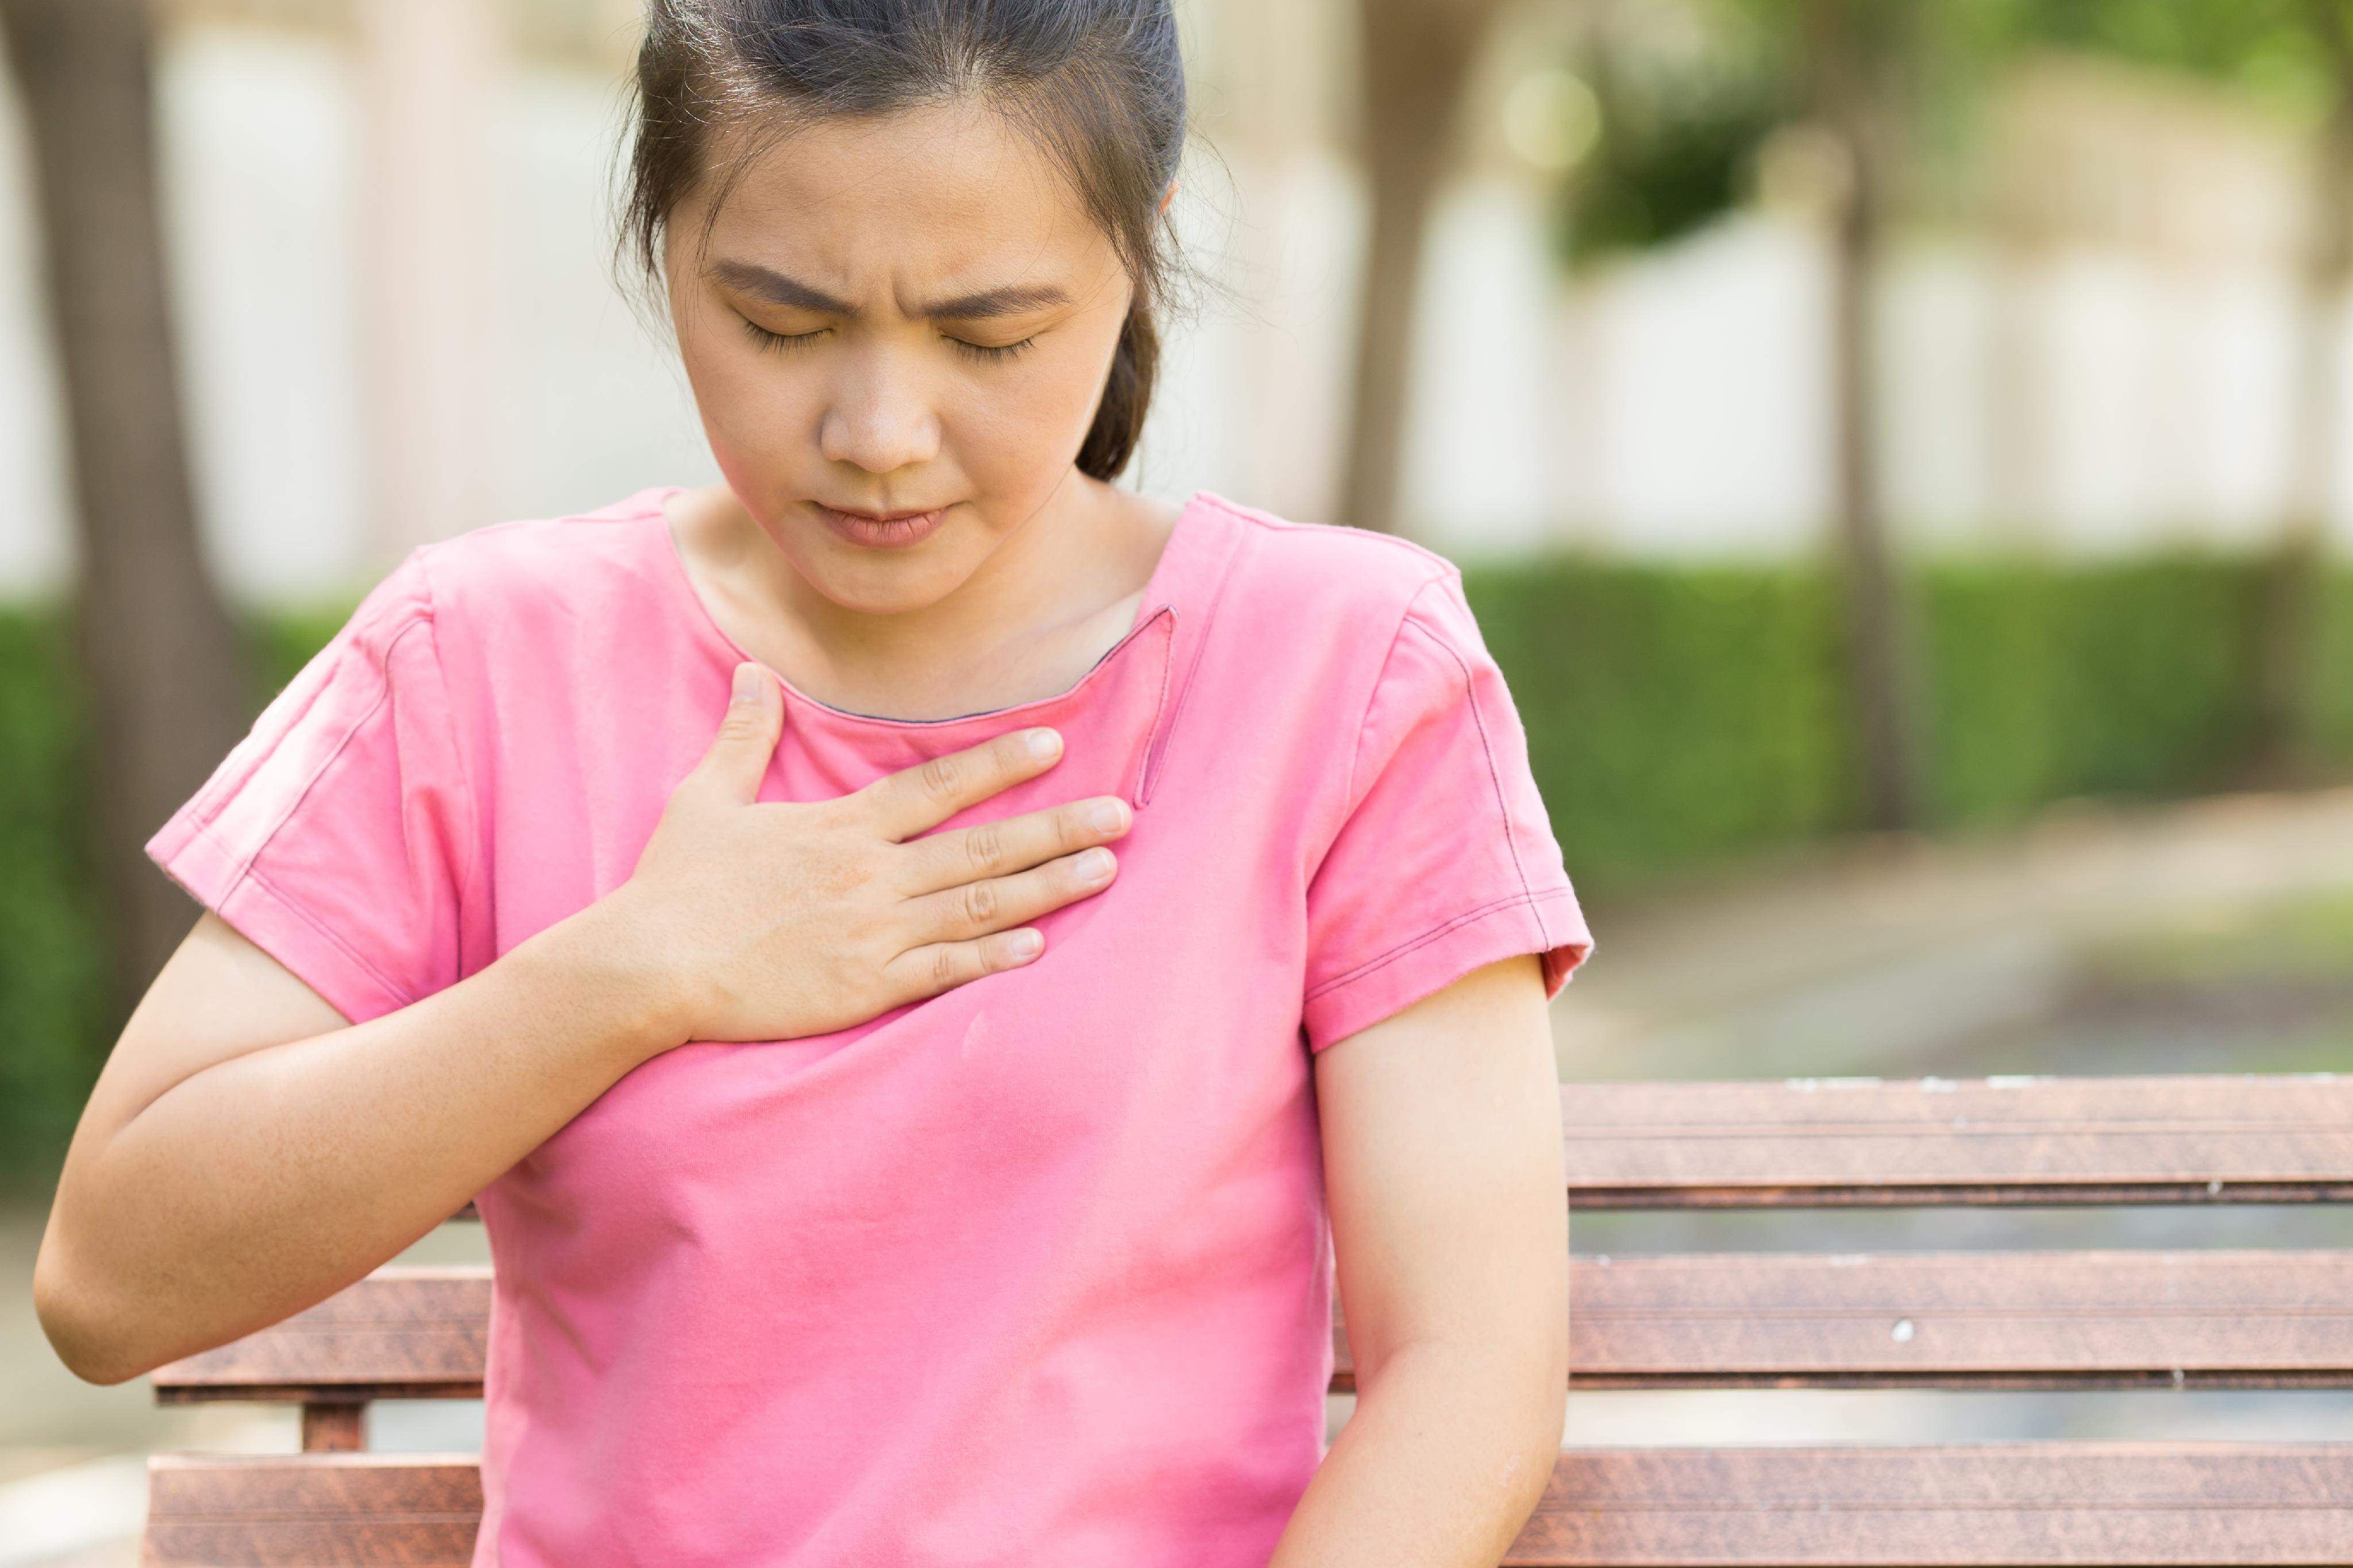 Heartburn, Stomach discomfort: Don't ignore these signs